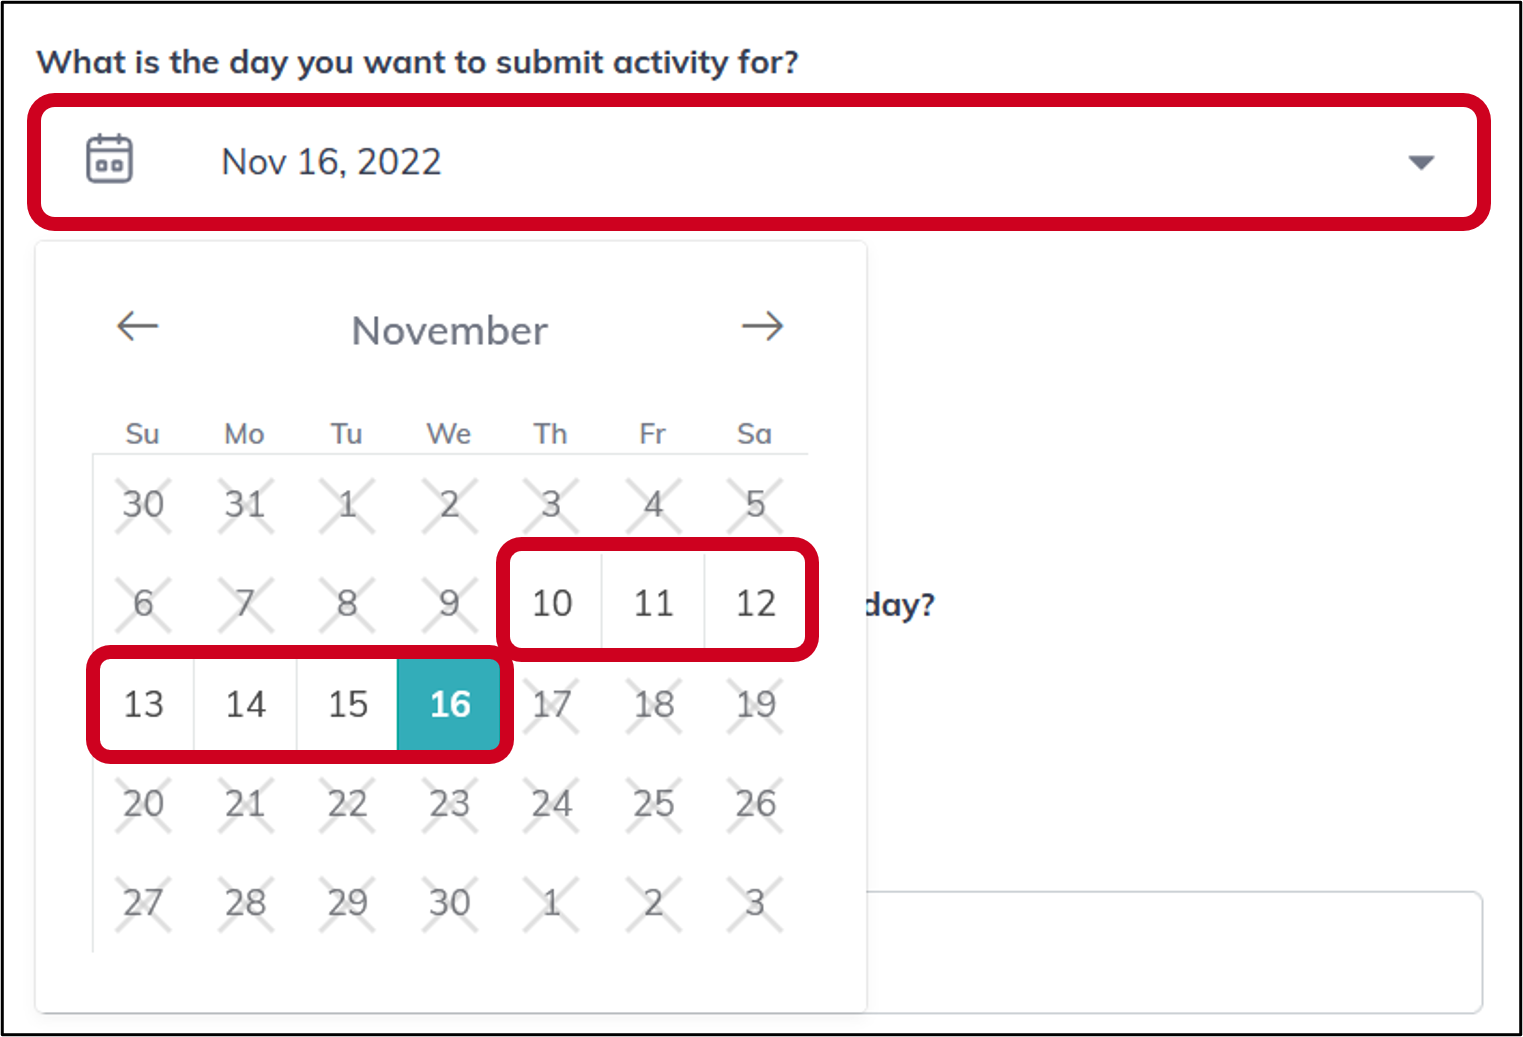 reports_activity_form_choose_date.png